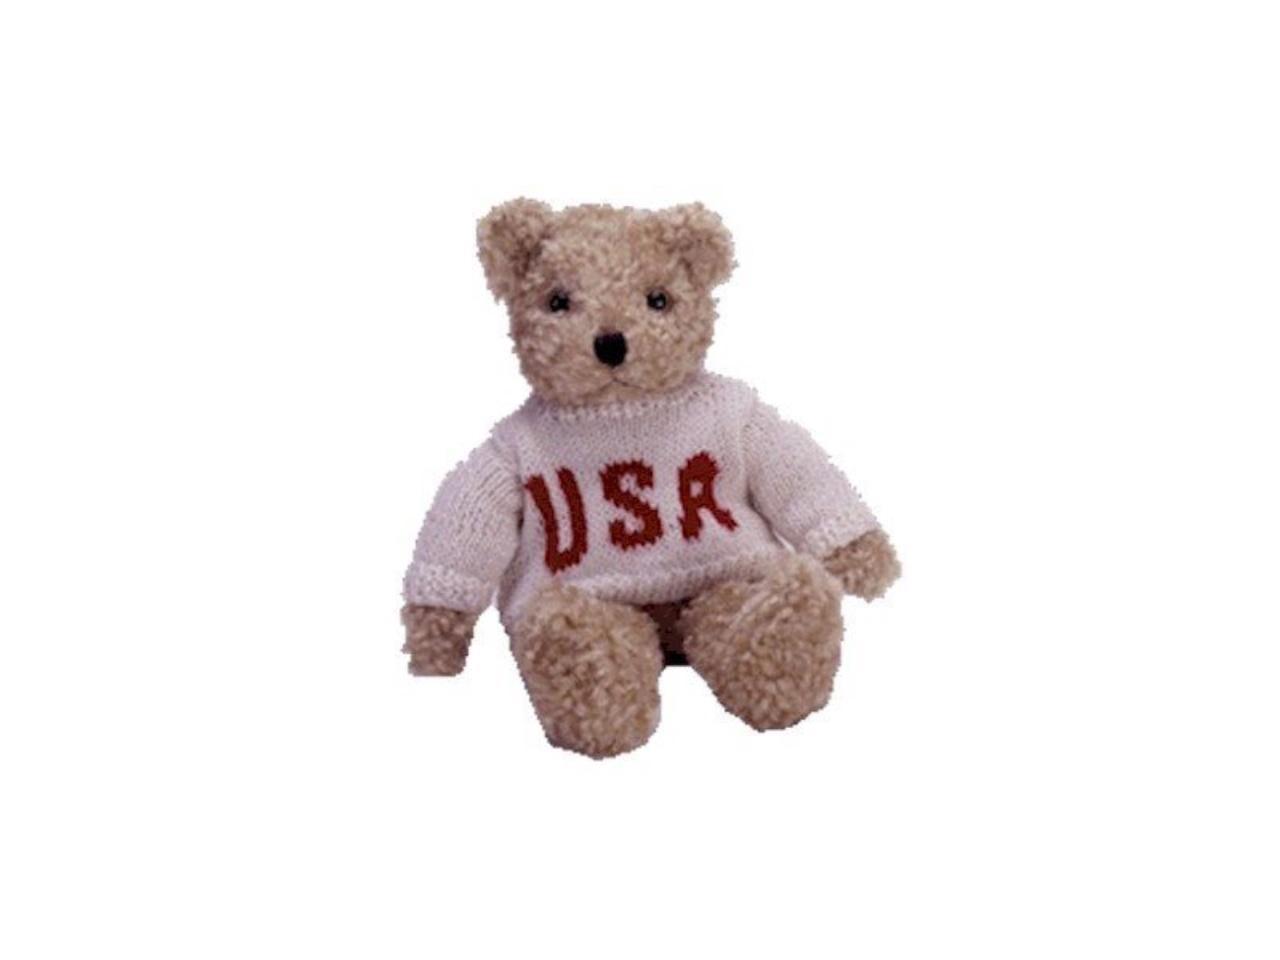 USA SWEATER Details about  / BABY CURLY BEAR TY BEANIE BABY 10/" BEAR